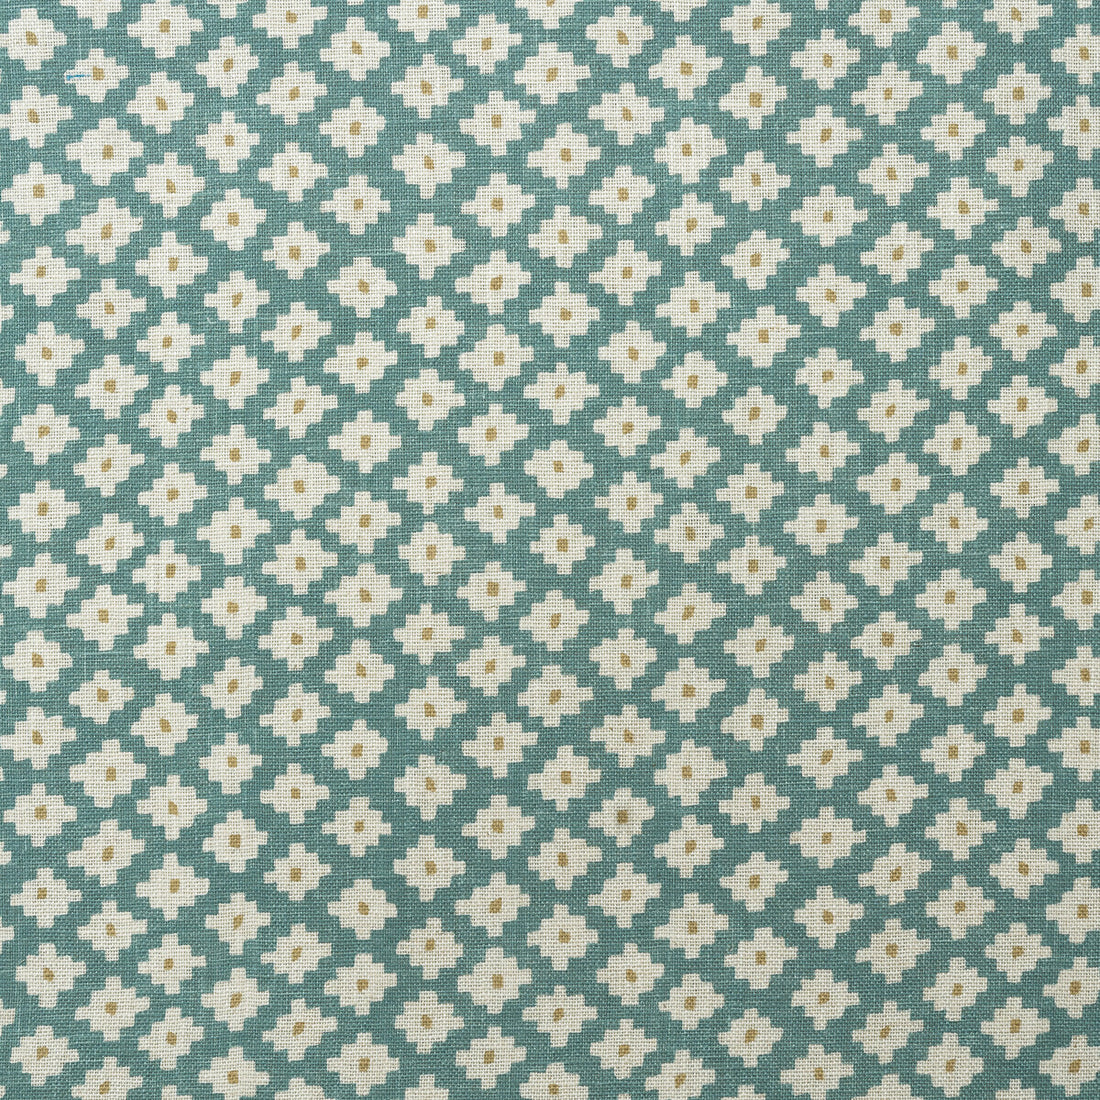 Maze fabric in turquoise color - pattern AM100381.13.0 - by Kravet Couture in the Andrew Martin Garden Path collection